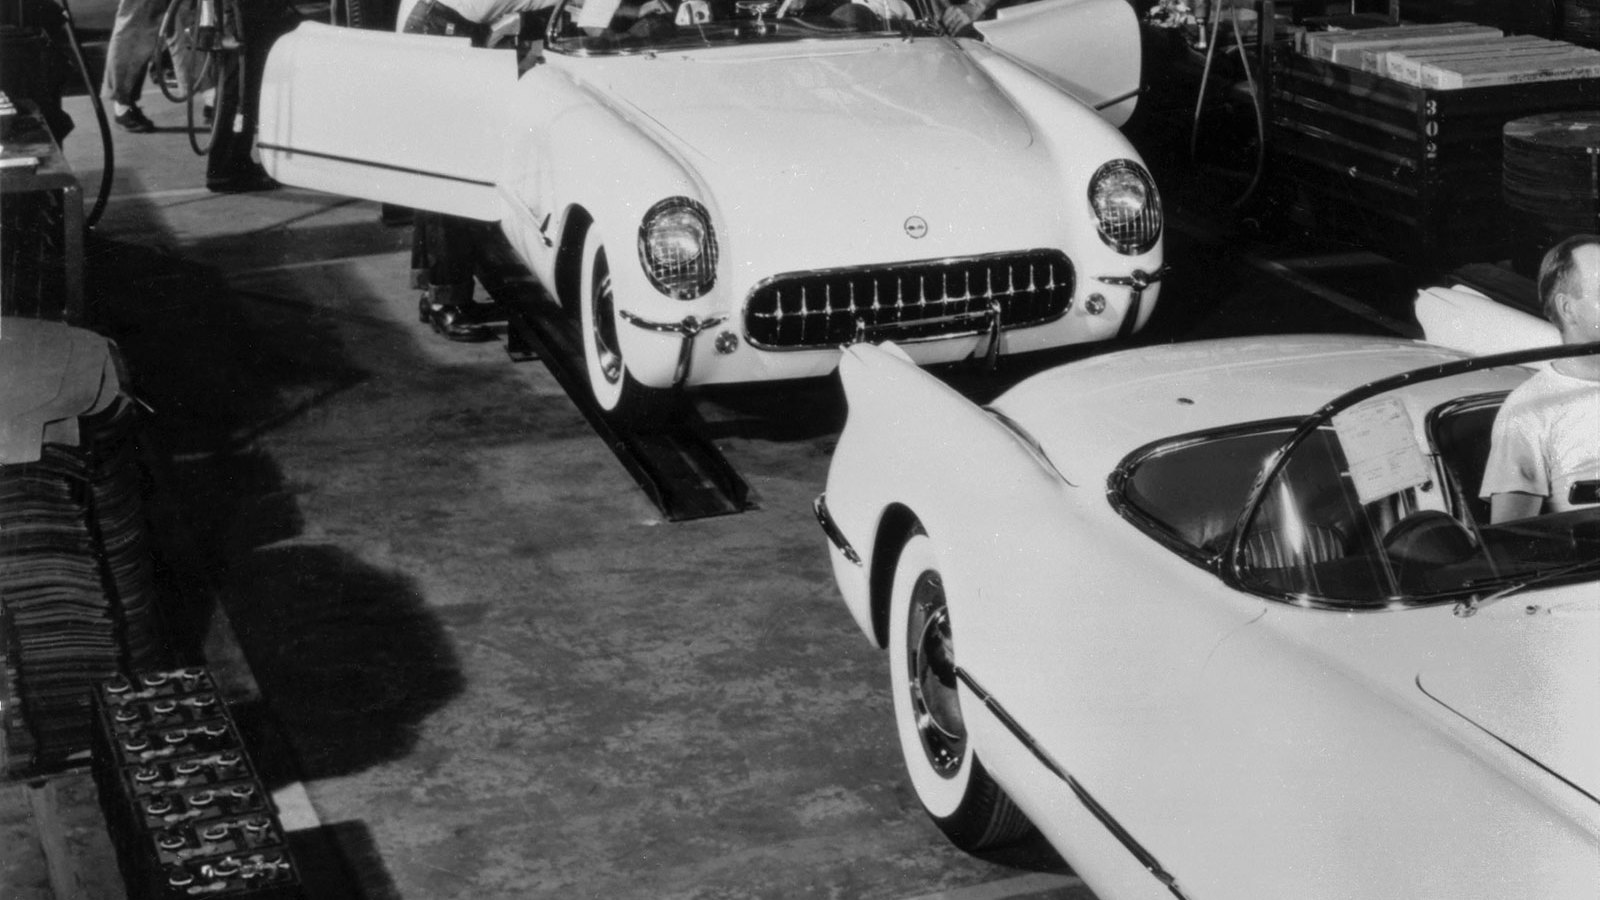 Production of the 1953 Chevrolet Corvette, the very first Corvette